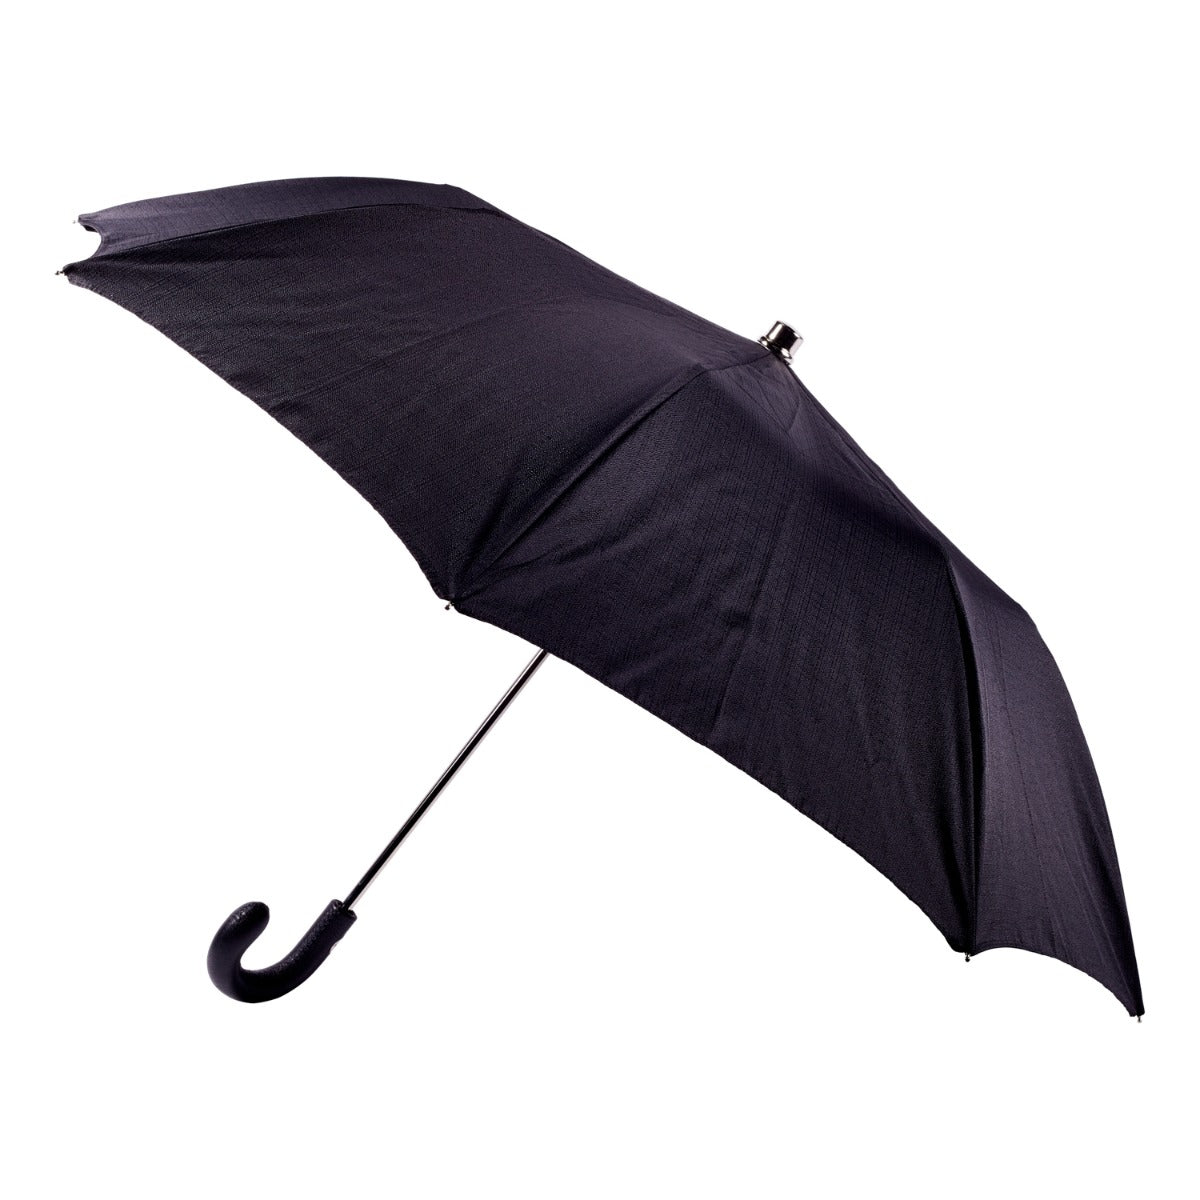 A Black Pigskin Travel Umbrella with Black Canopy from KirbyAllison.com on a white background.